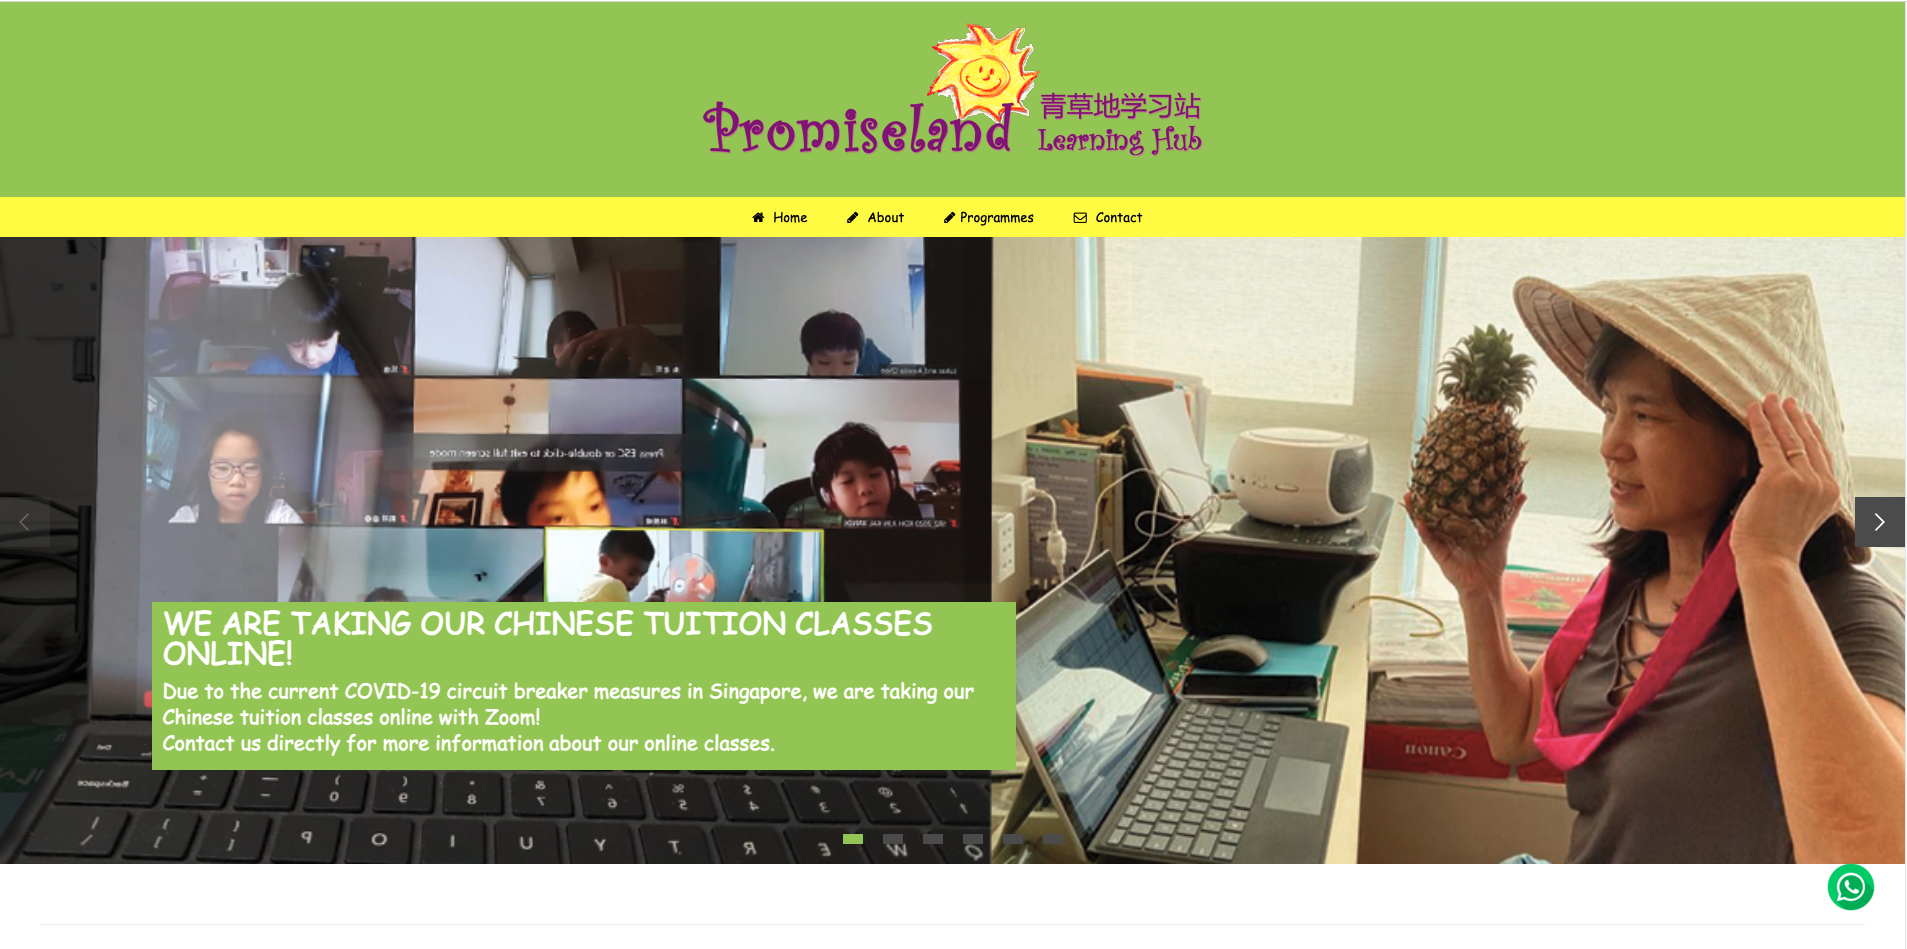 promiseland-learning-hub-chinese-tuition-centre